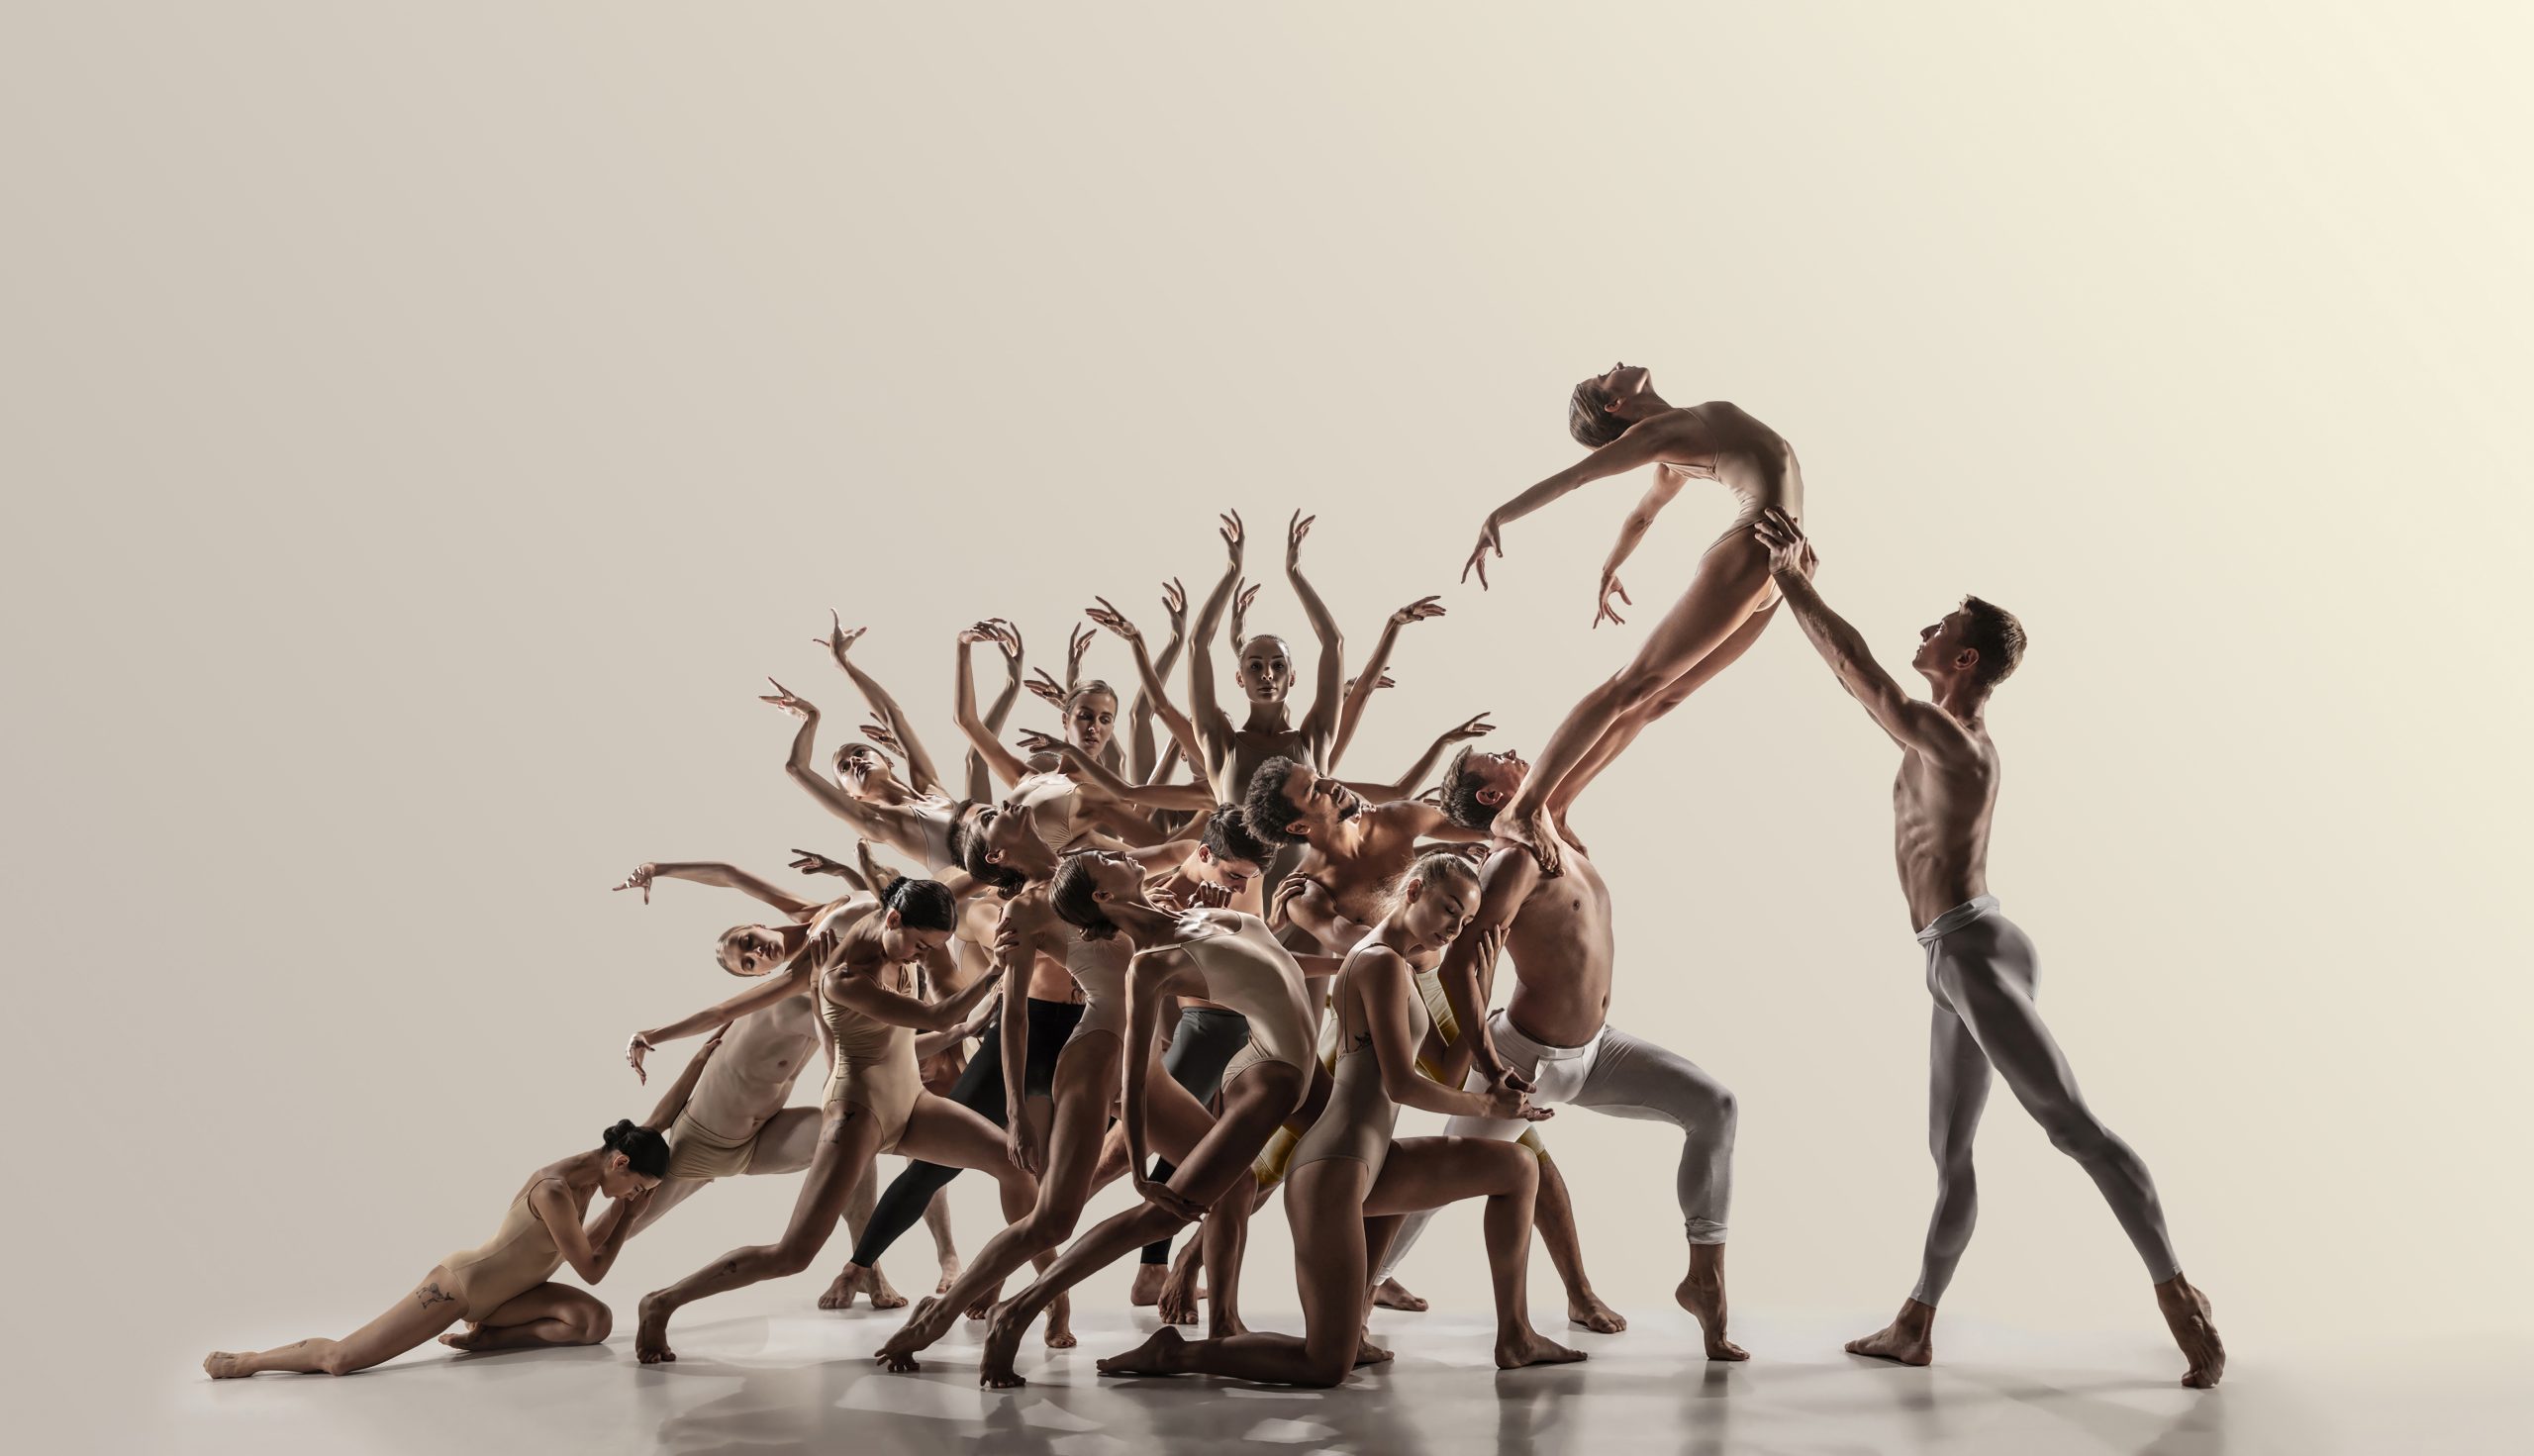 Support. Group of modern ballet dancers. Contemporary art. Young flexible athletic men and women in tights. Negative space. Concept of dance grace, inspiration, creativity. Made of shots of 11 models.